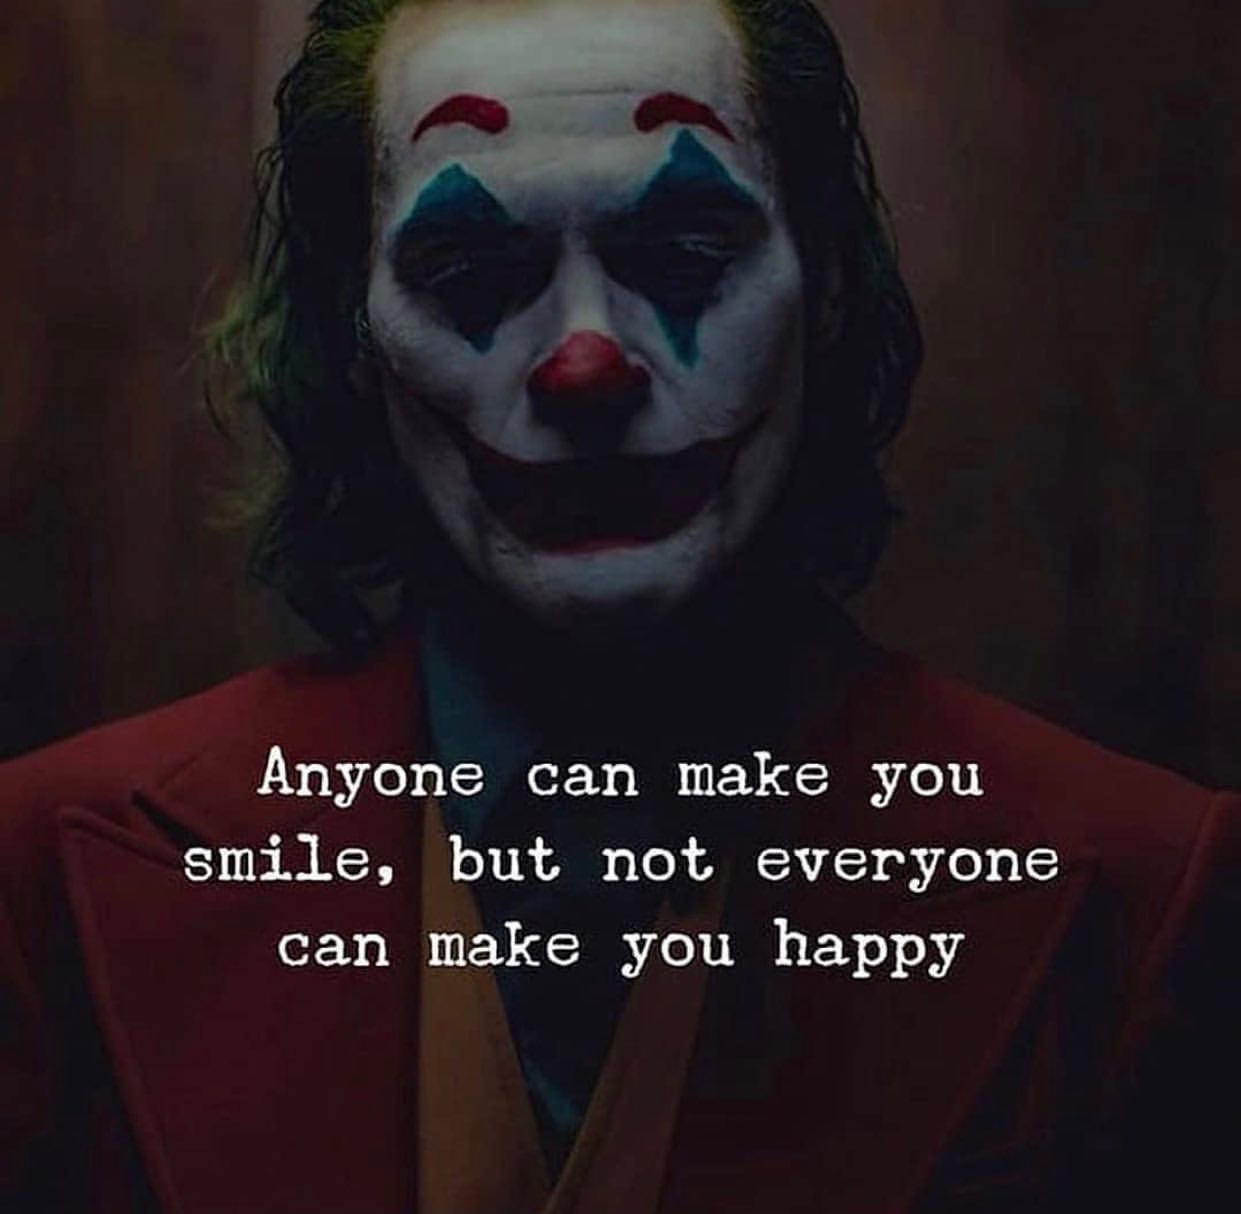 Anyone can make you smile, but not everyone can make you happy.